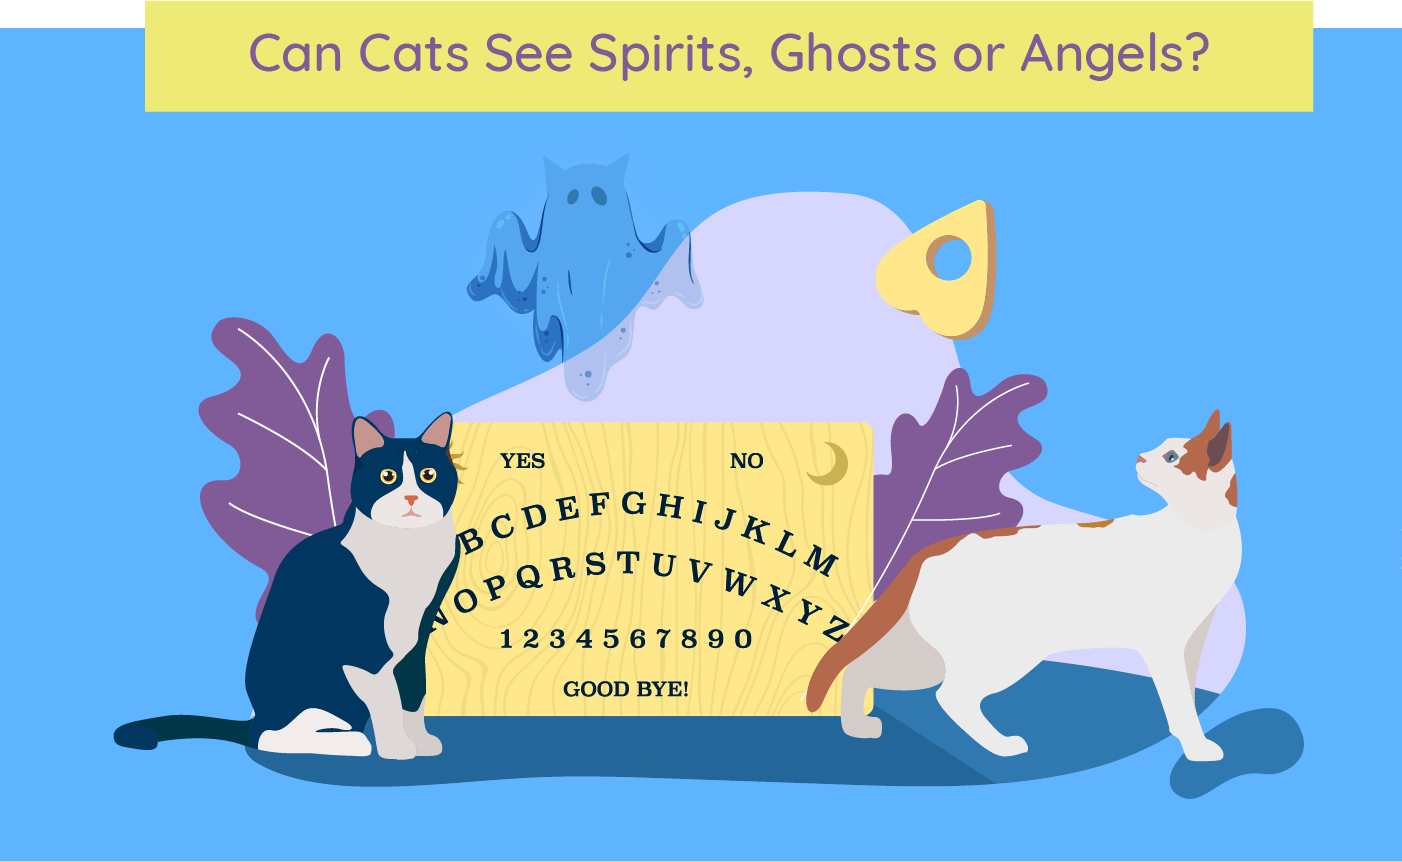 Image titled 'Can Cats See Spirits, Ghosts, and Angels?' which explores the belief that cats can perceive supernatural entities.